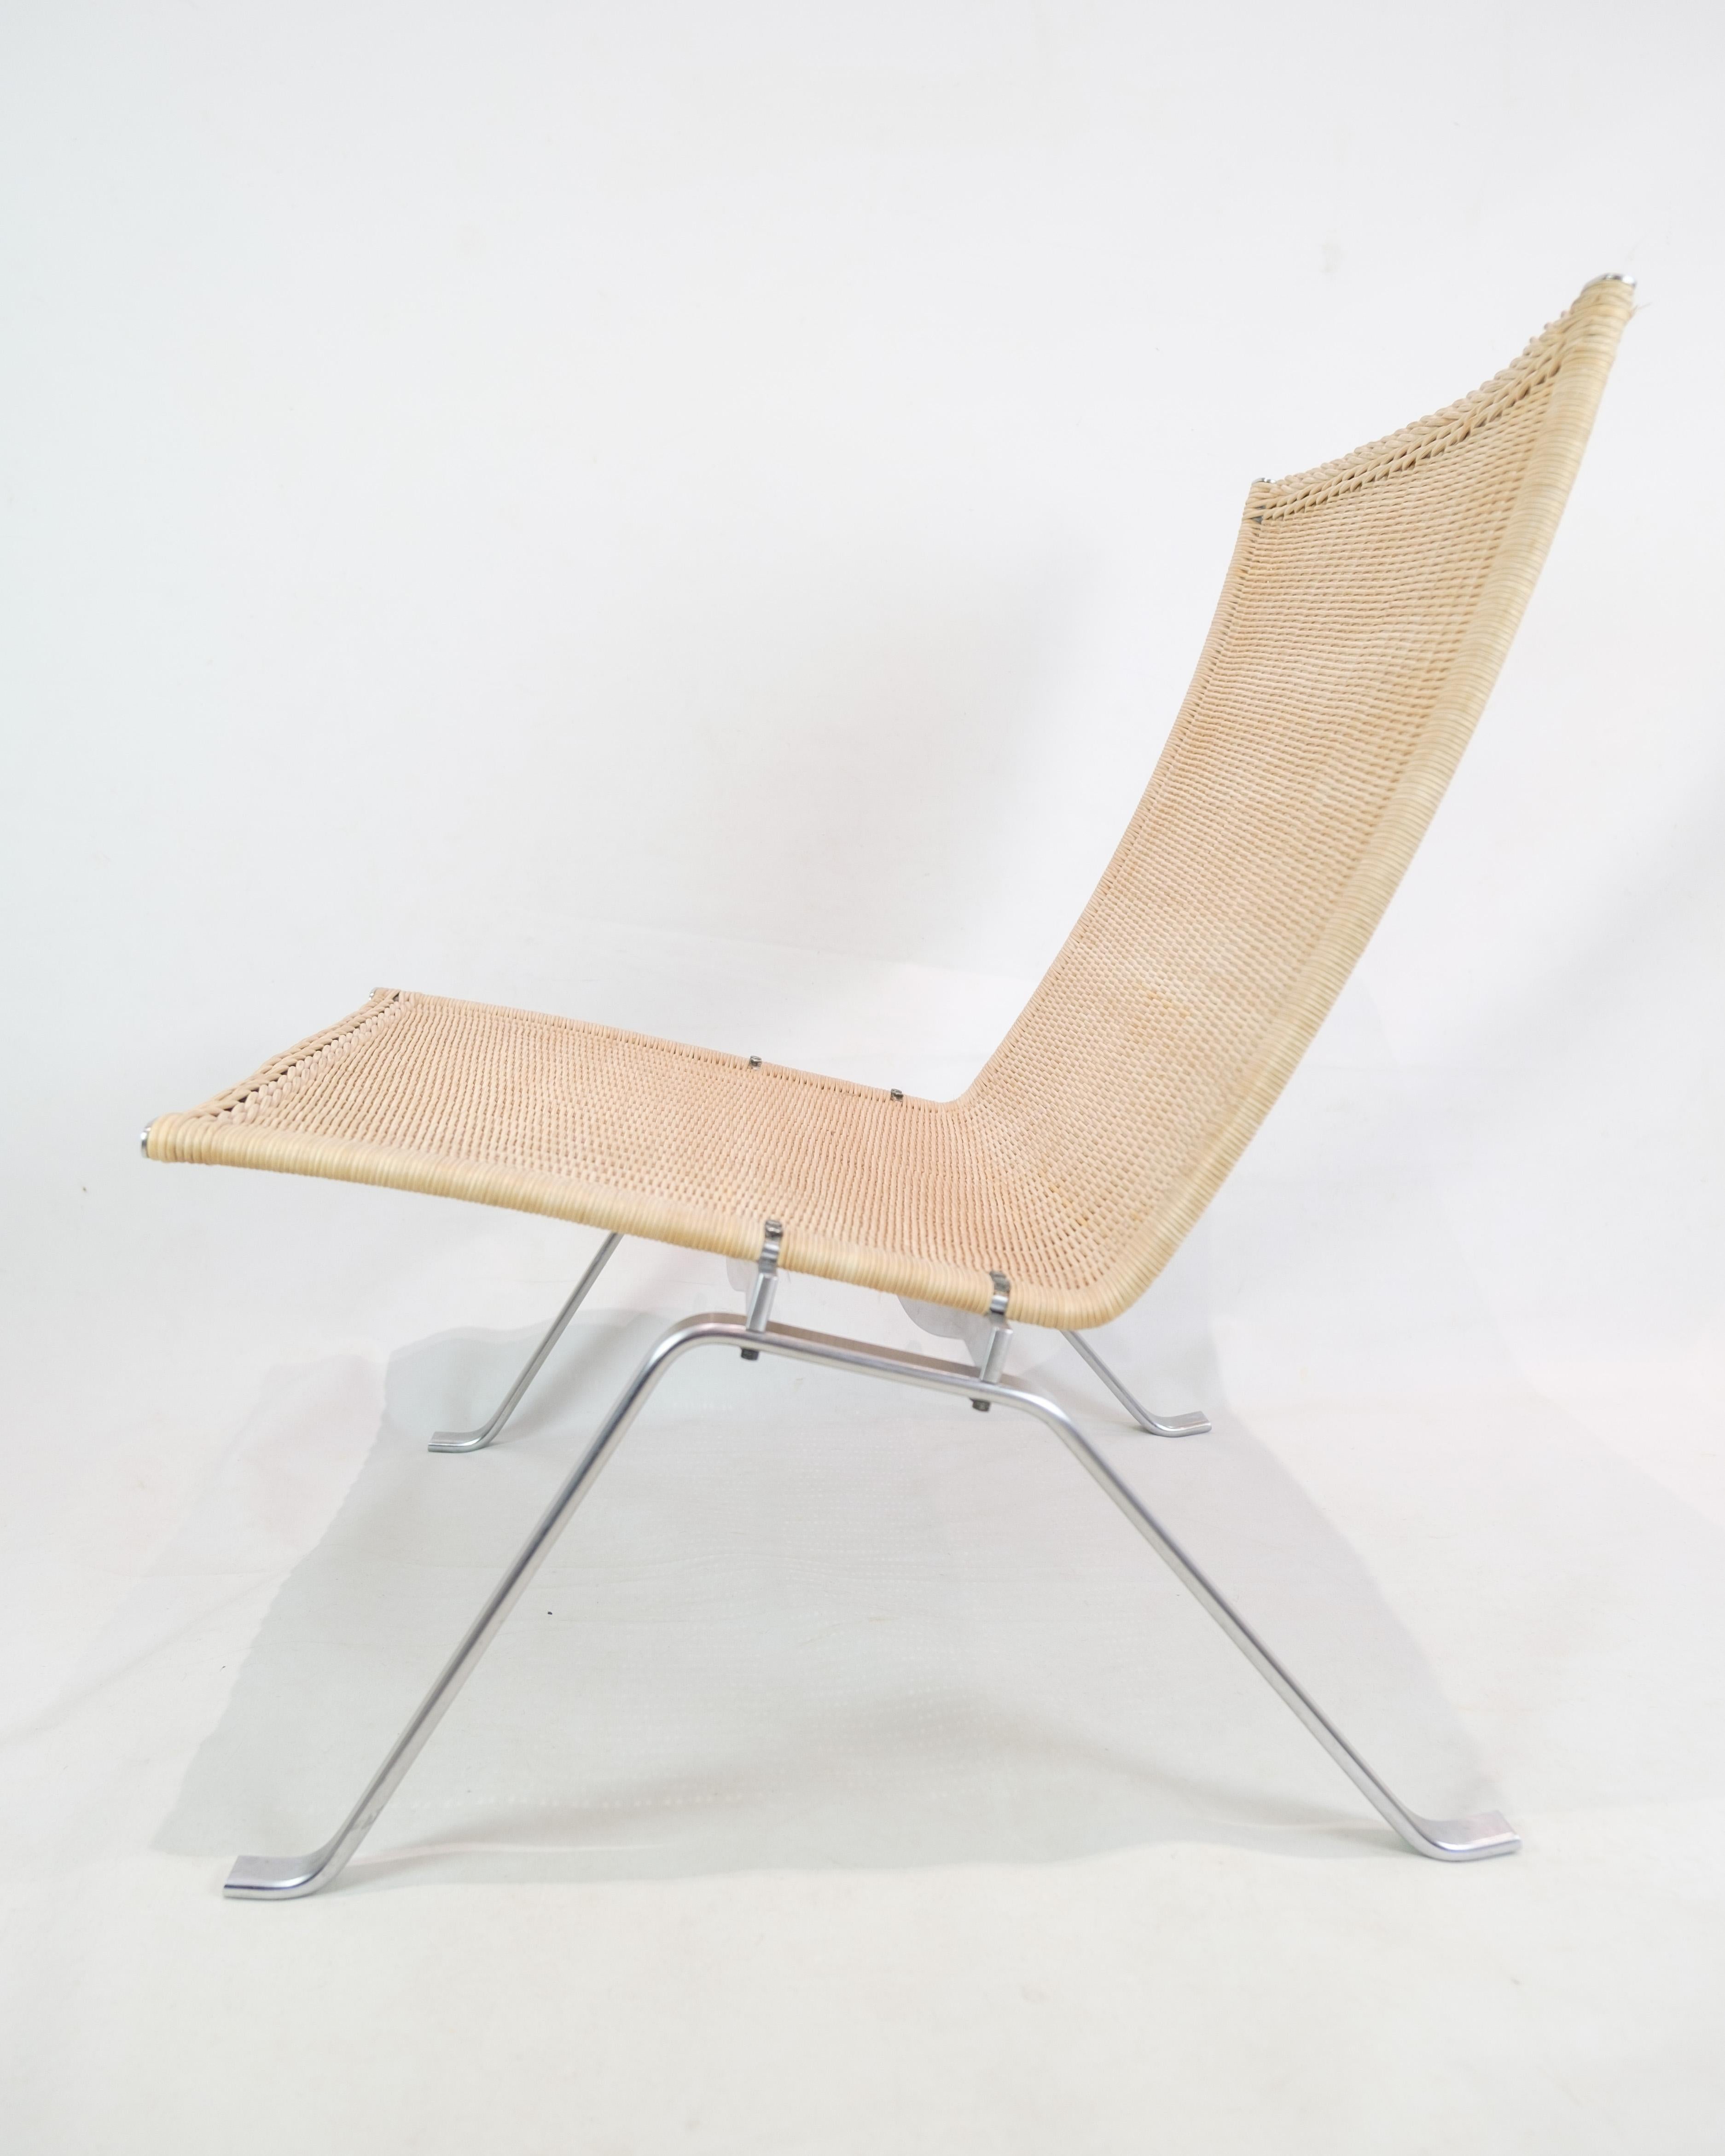 Lounge Chair Model PK22 By Poul Kjærholm Made By Fritz Hansen From 1993s In Good Condition For Sale In Lejre, DK